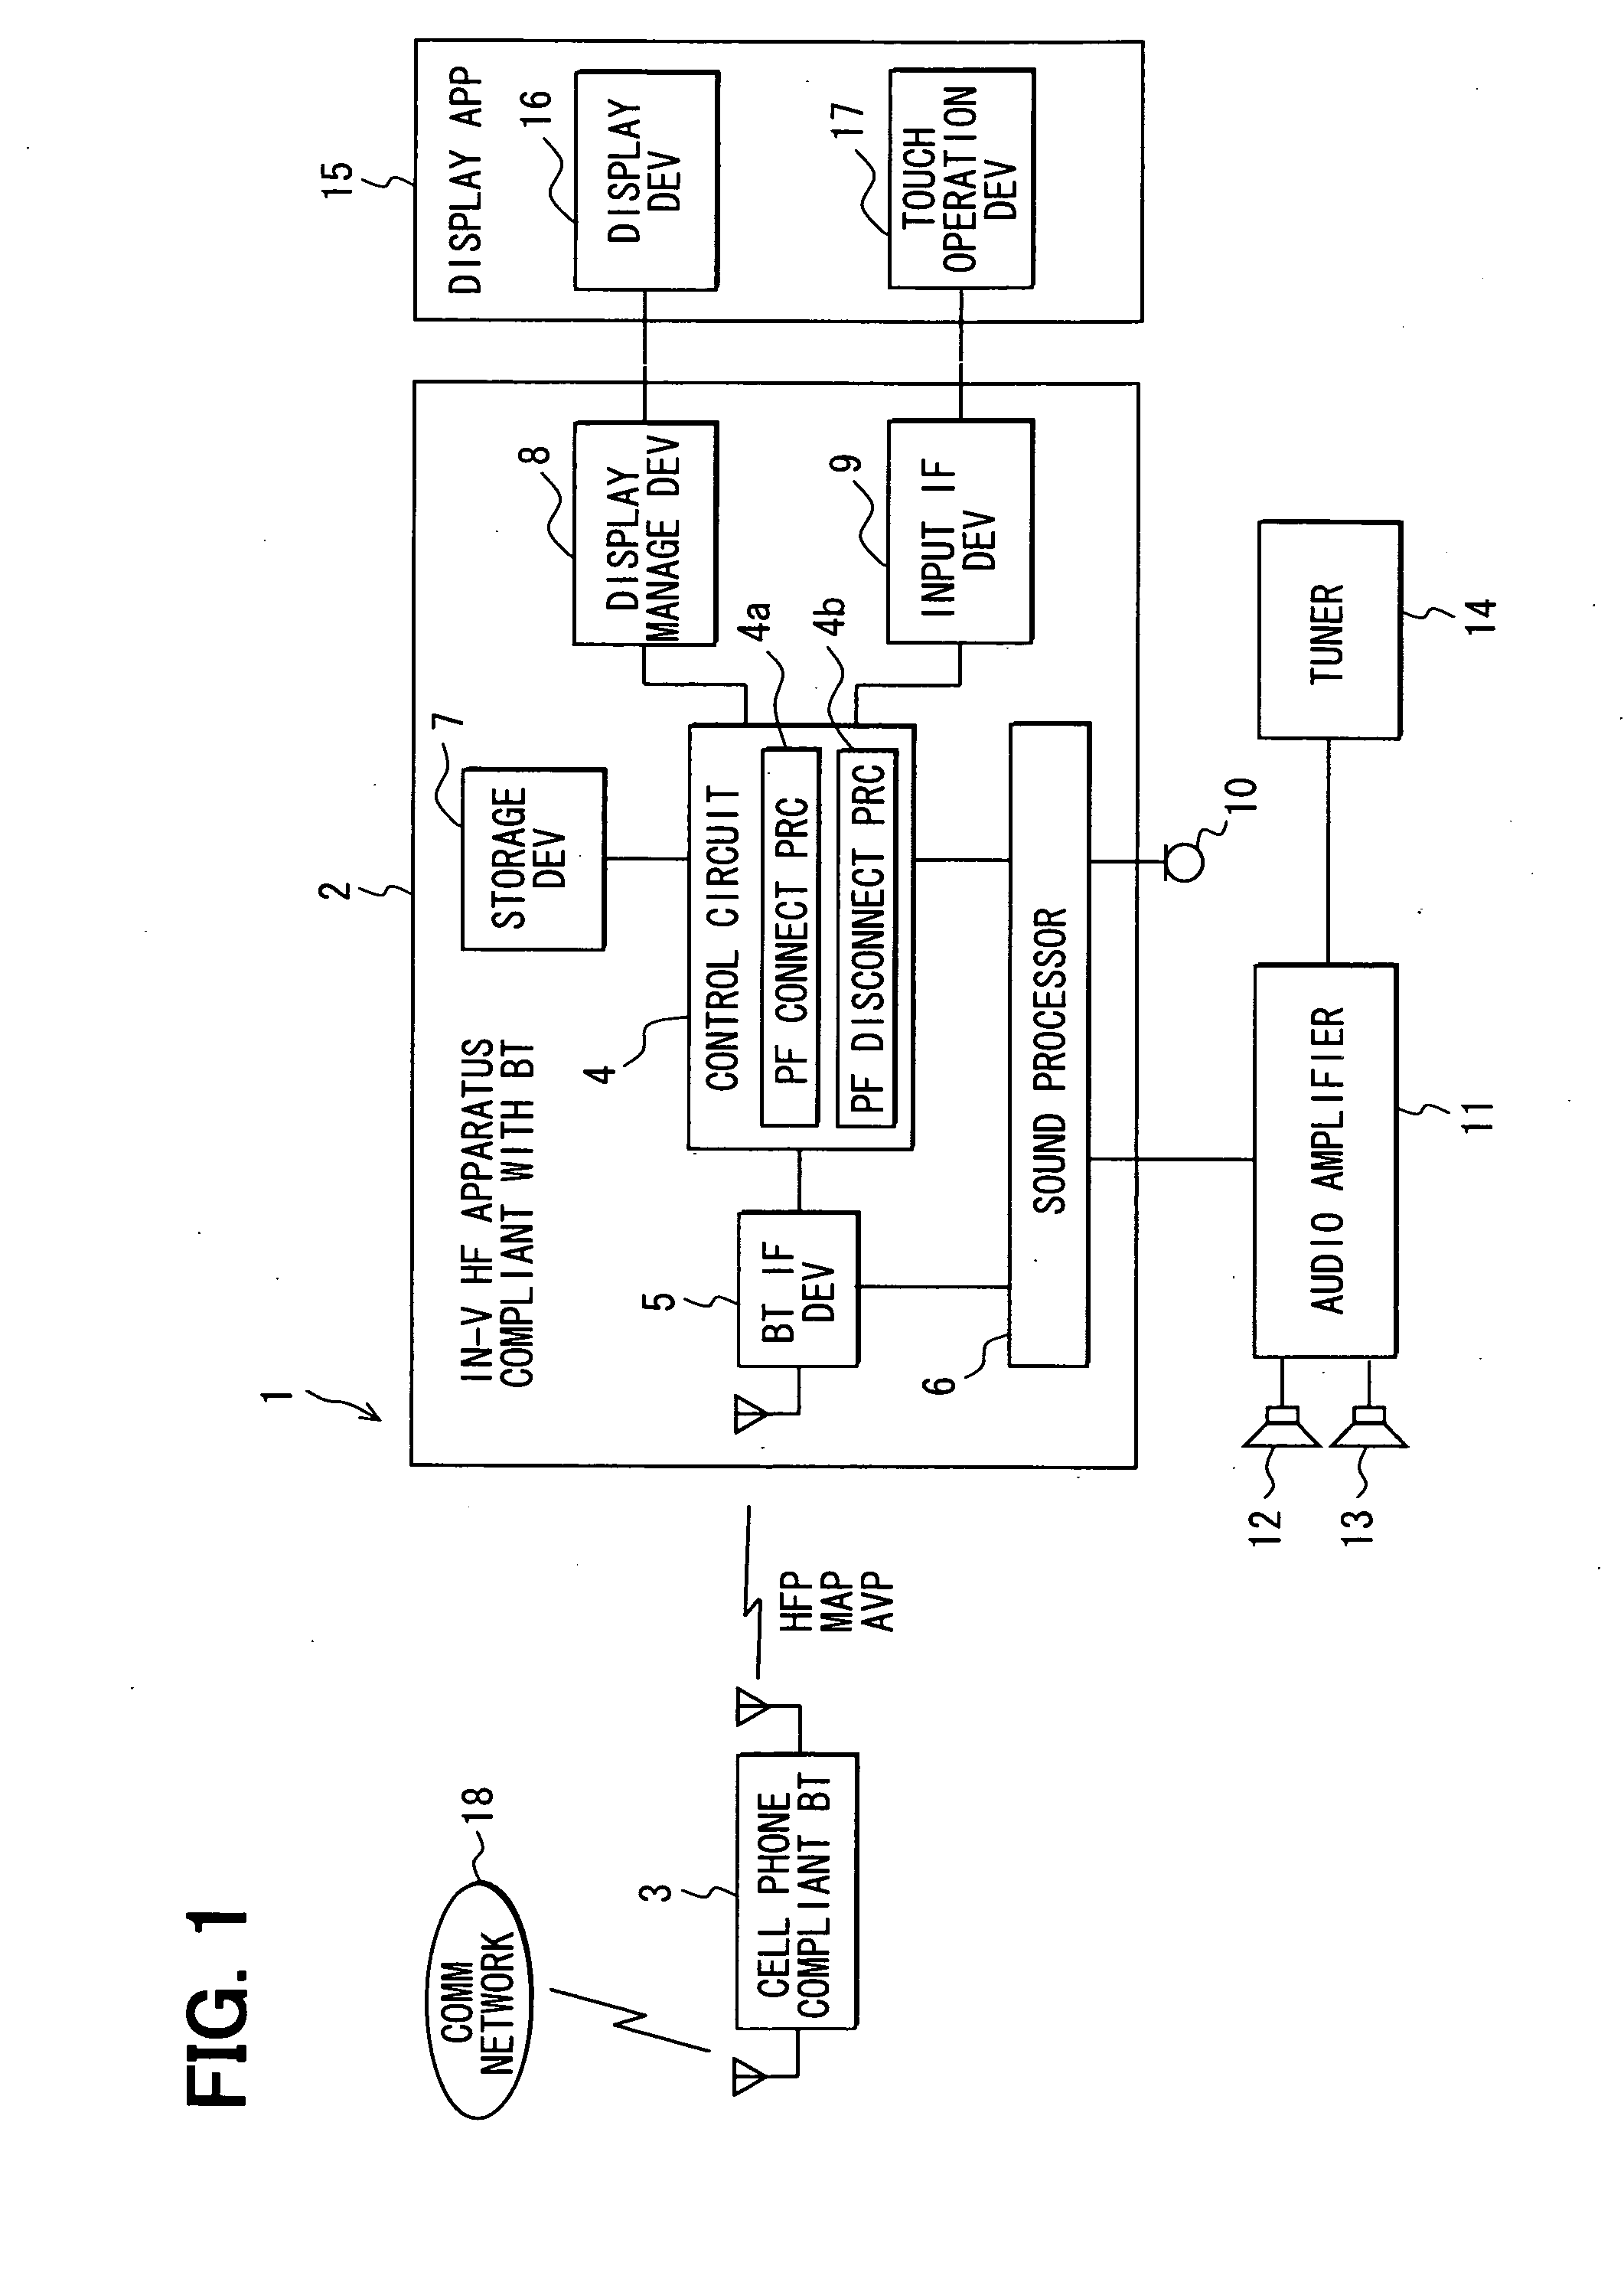 In-vehicle apparatus with handsfree function